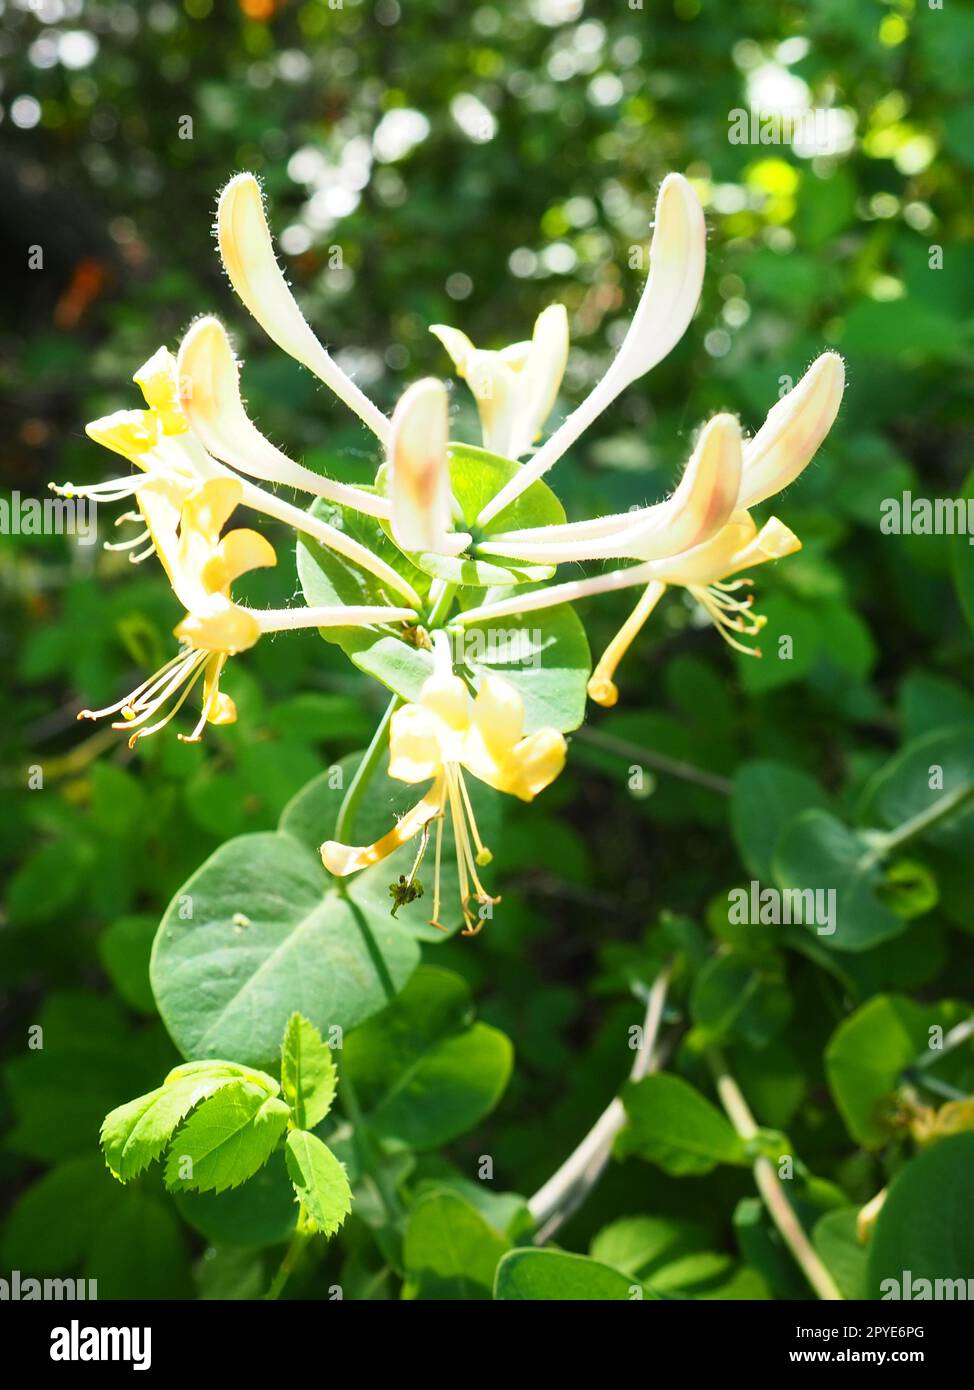 Honeysuckle blooms in the garden. White and yellow flowers of Lonicera Caprifolium against of green leaves. Floriculture and horticulture. Arching shrubs or twining vines in the family Caprifoliaceae. Stock Photo